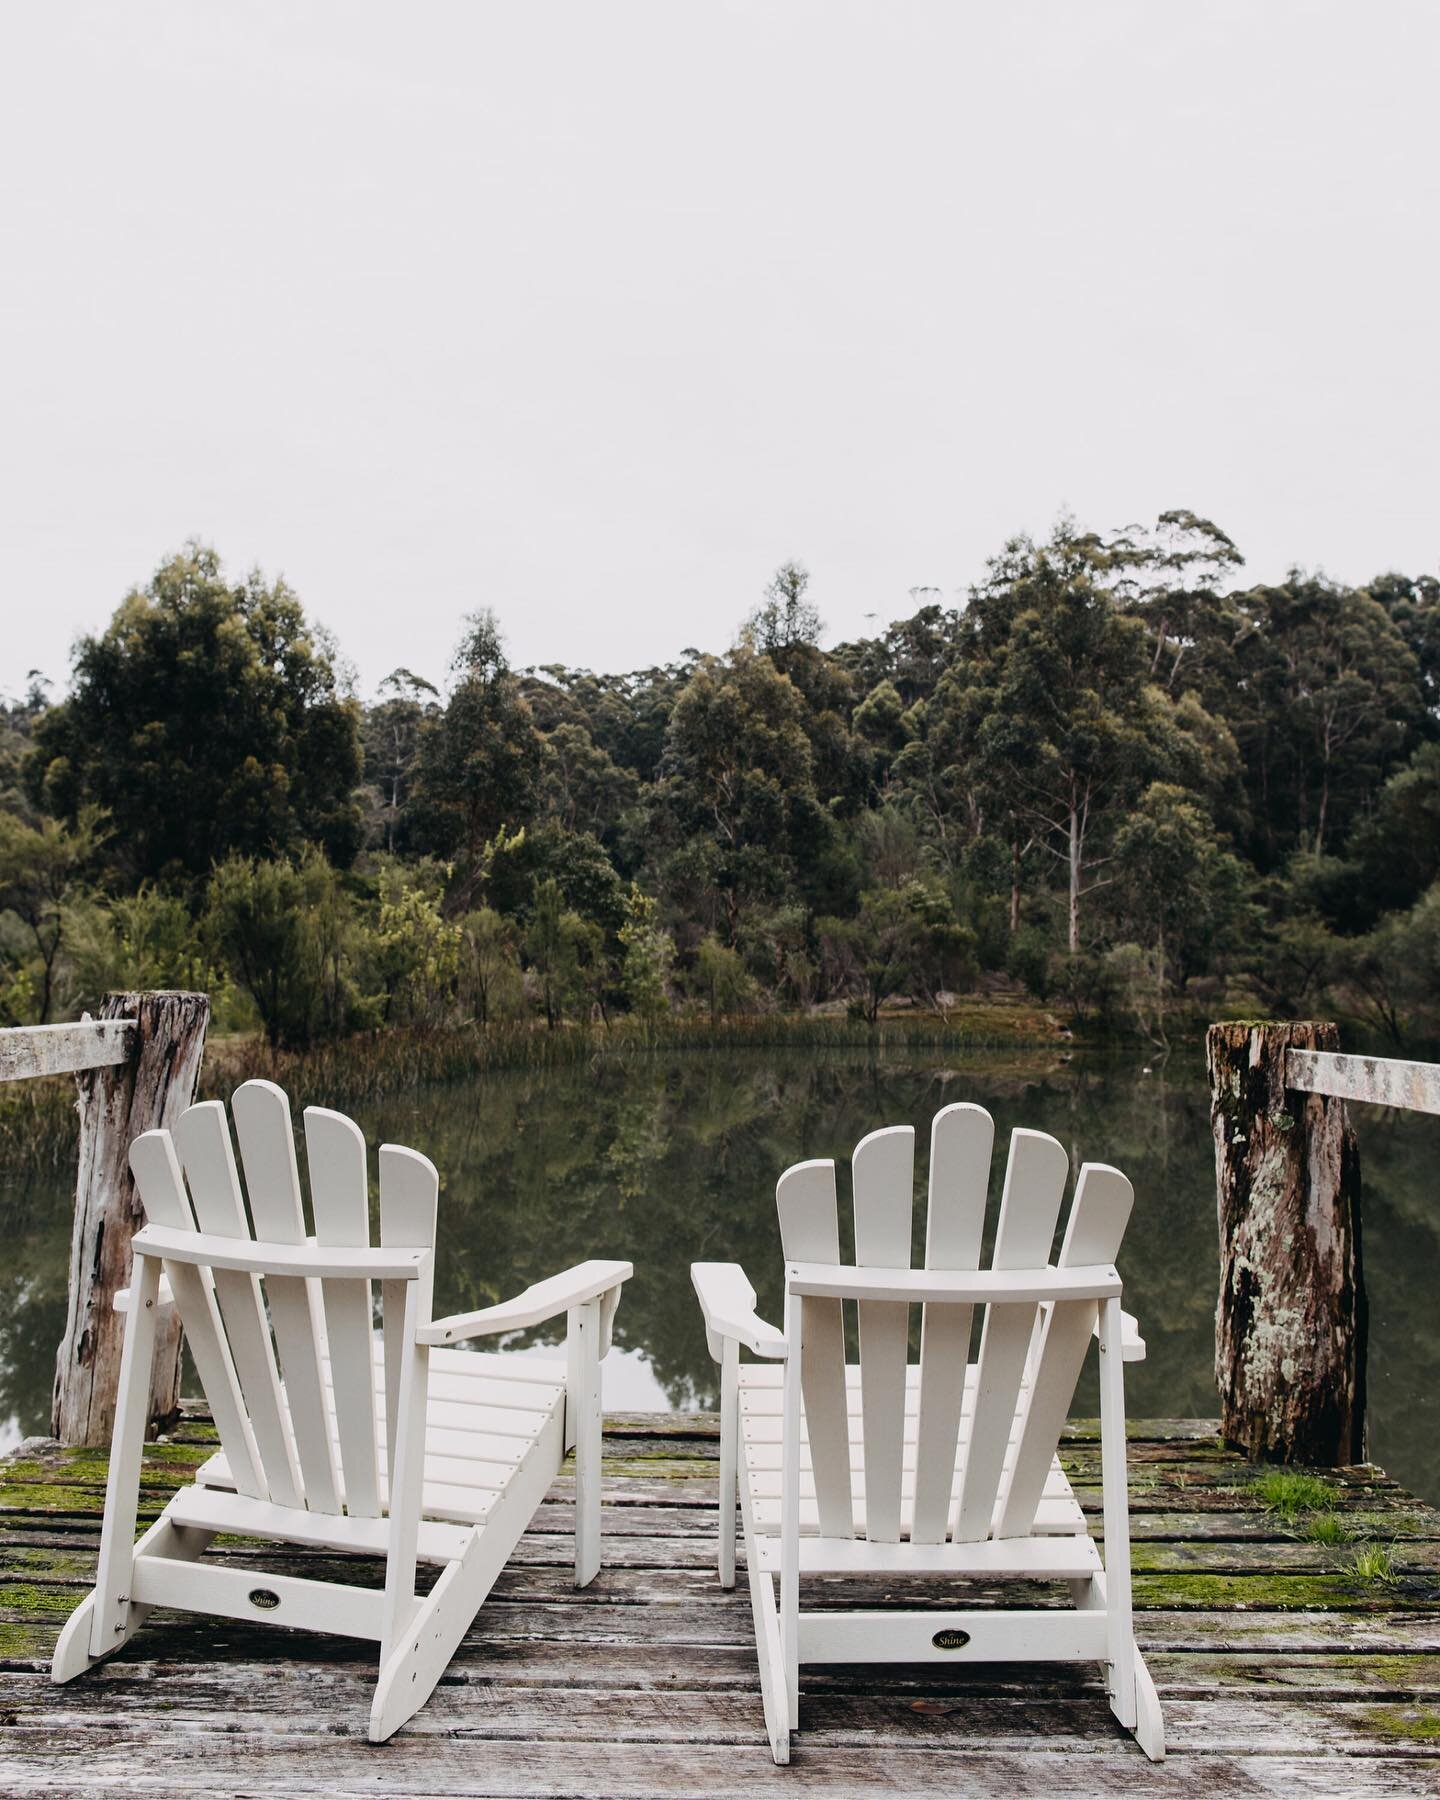 Take a seat 〰️ watch the world go by

With the majestic forest as your backdrop and birdsong in the air it&rsquo;s truly a grounding and wondrous place to be 🤍

Slow down, unwind and reconnect here at Stillwood

#stayatstillwood #stillwoodretreatden